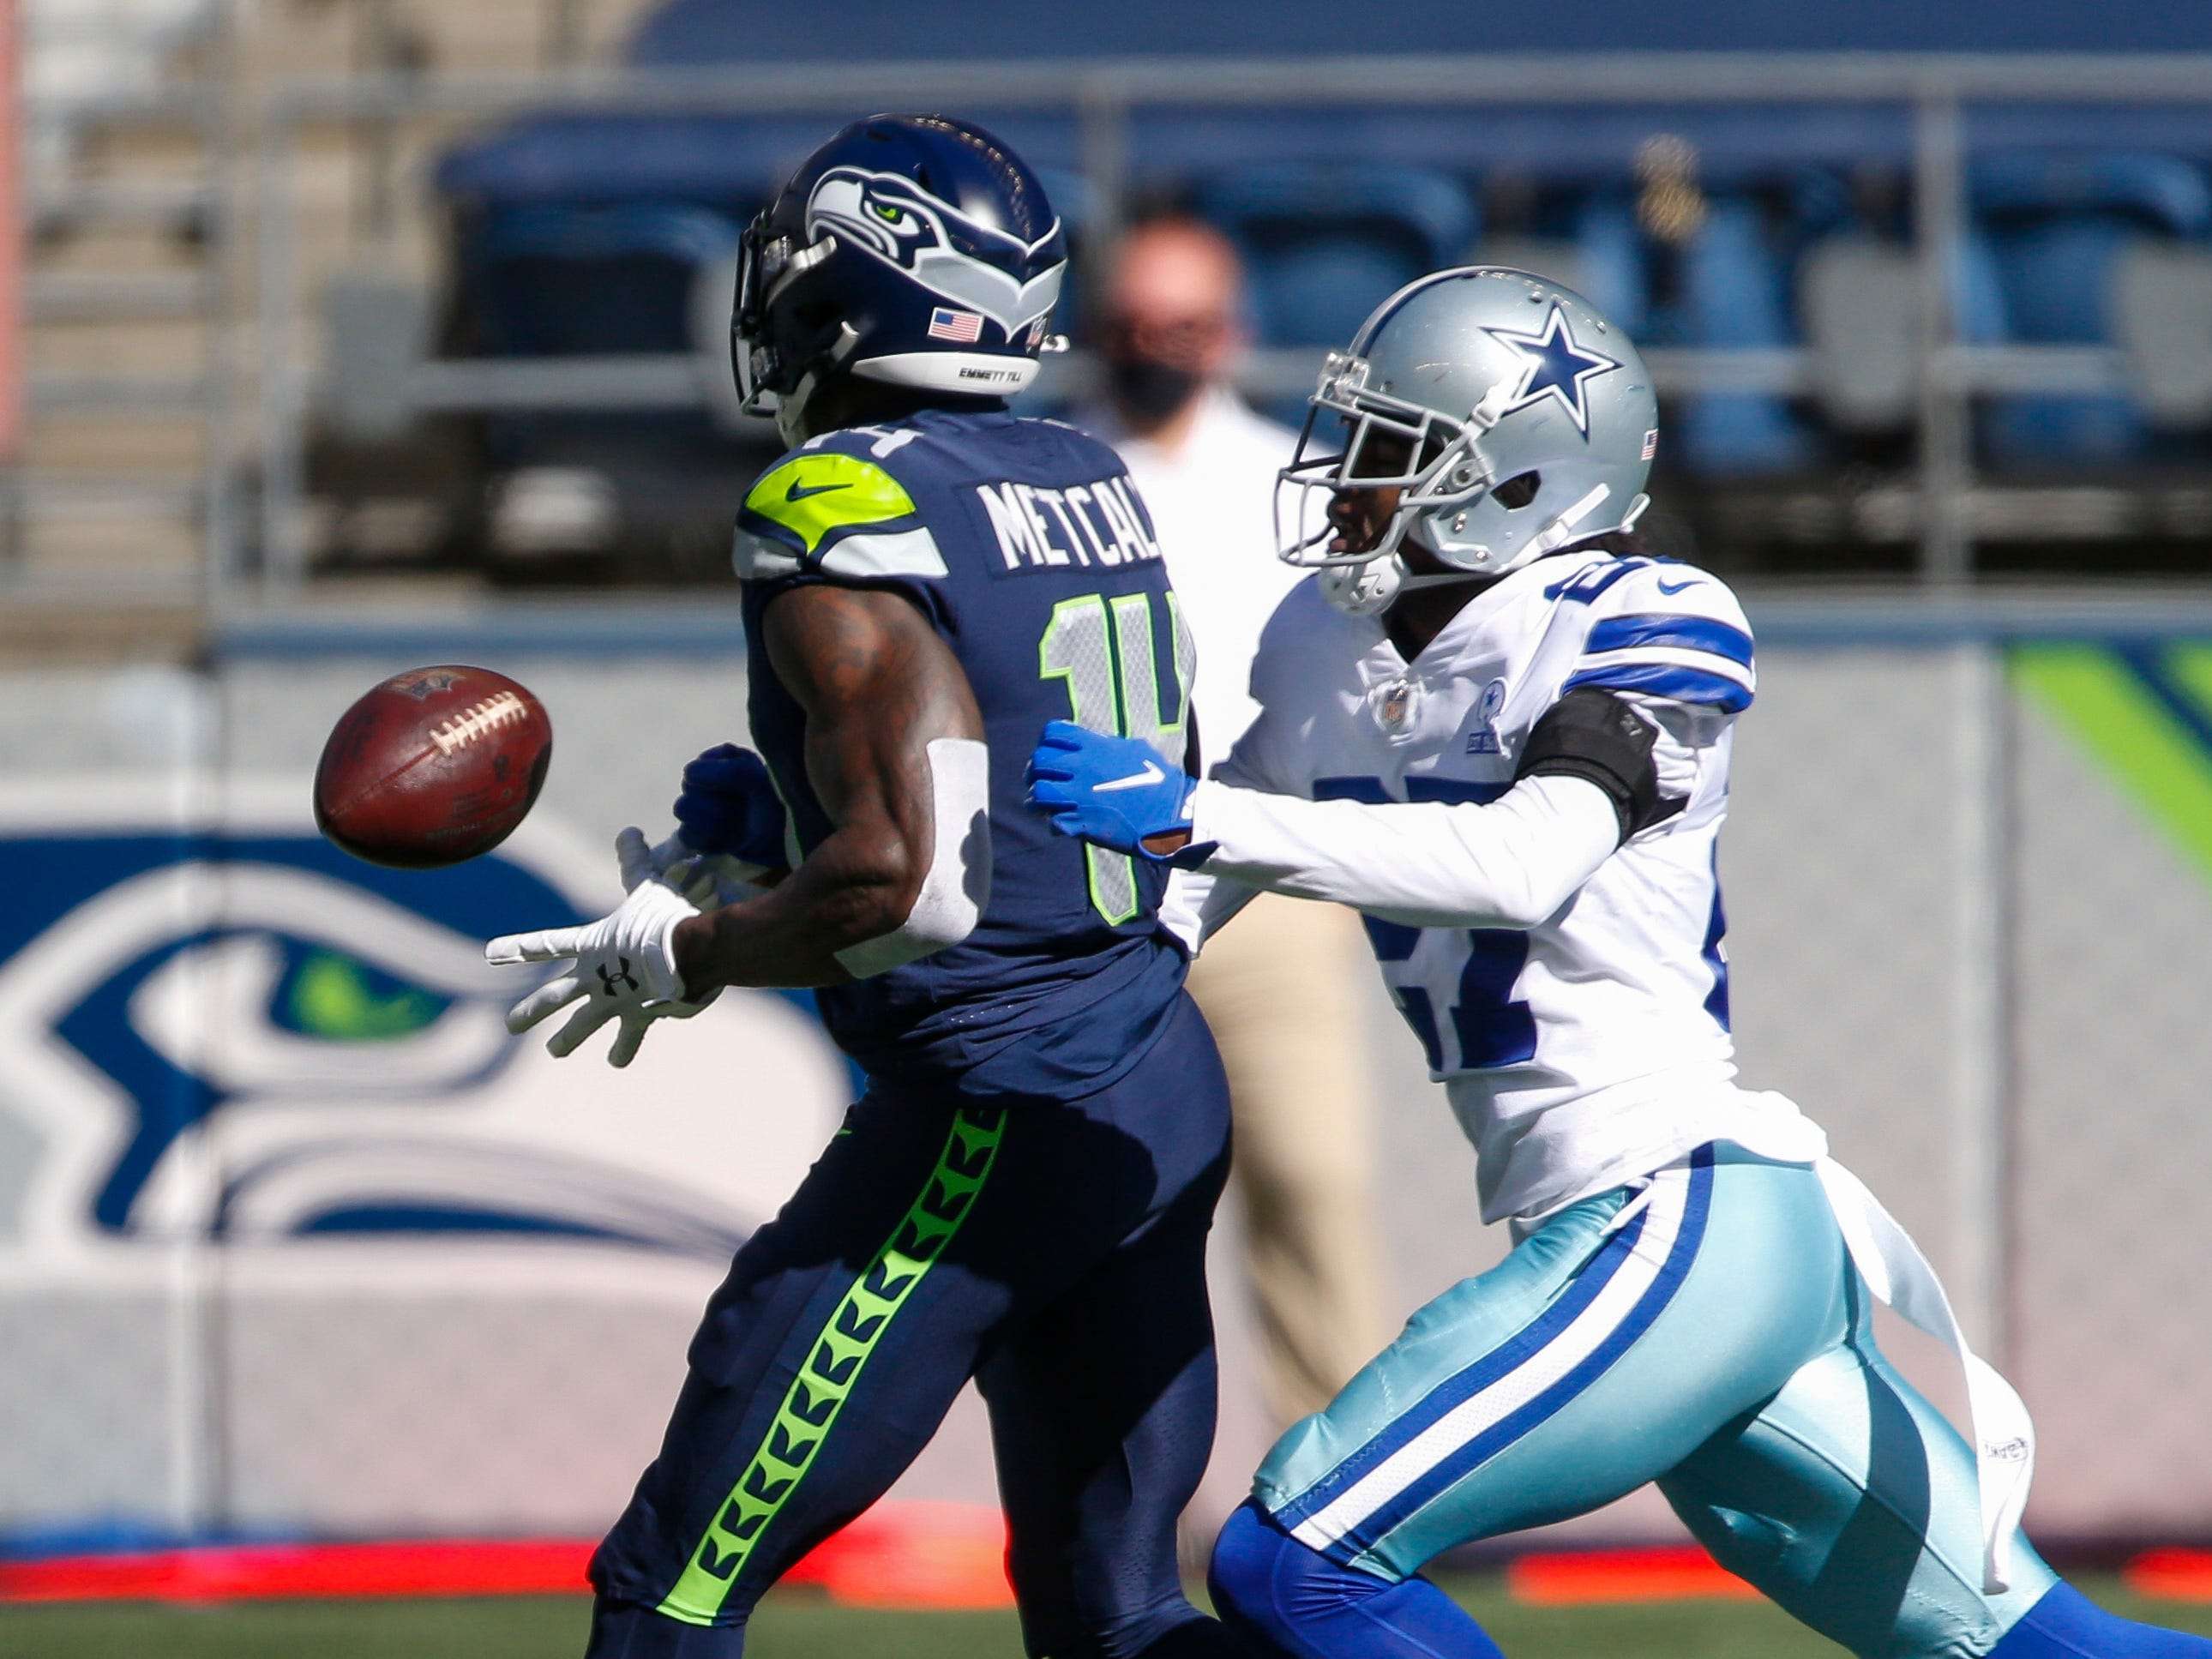 Seahawks receiver DK Metcalf made the worst blunder of the season but found redemption with the